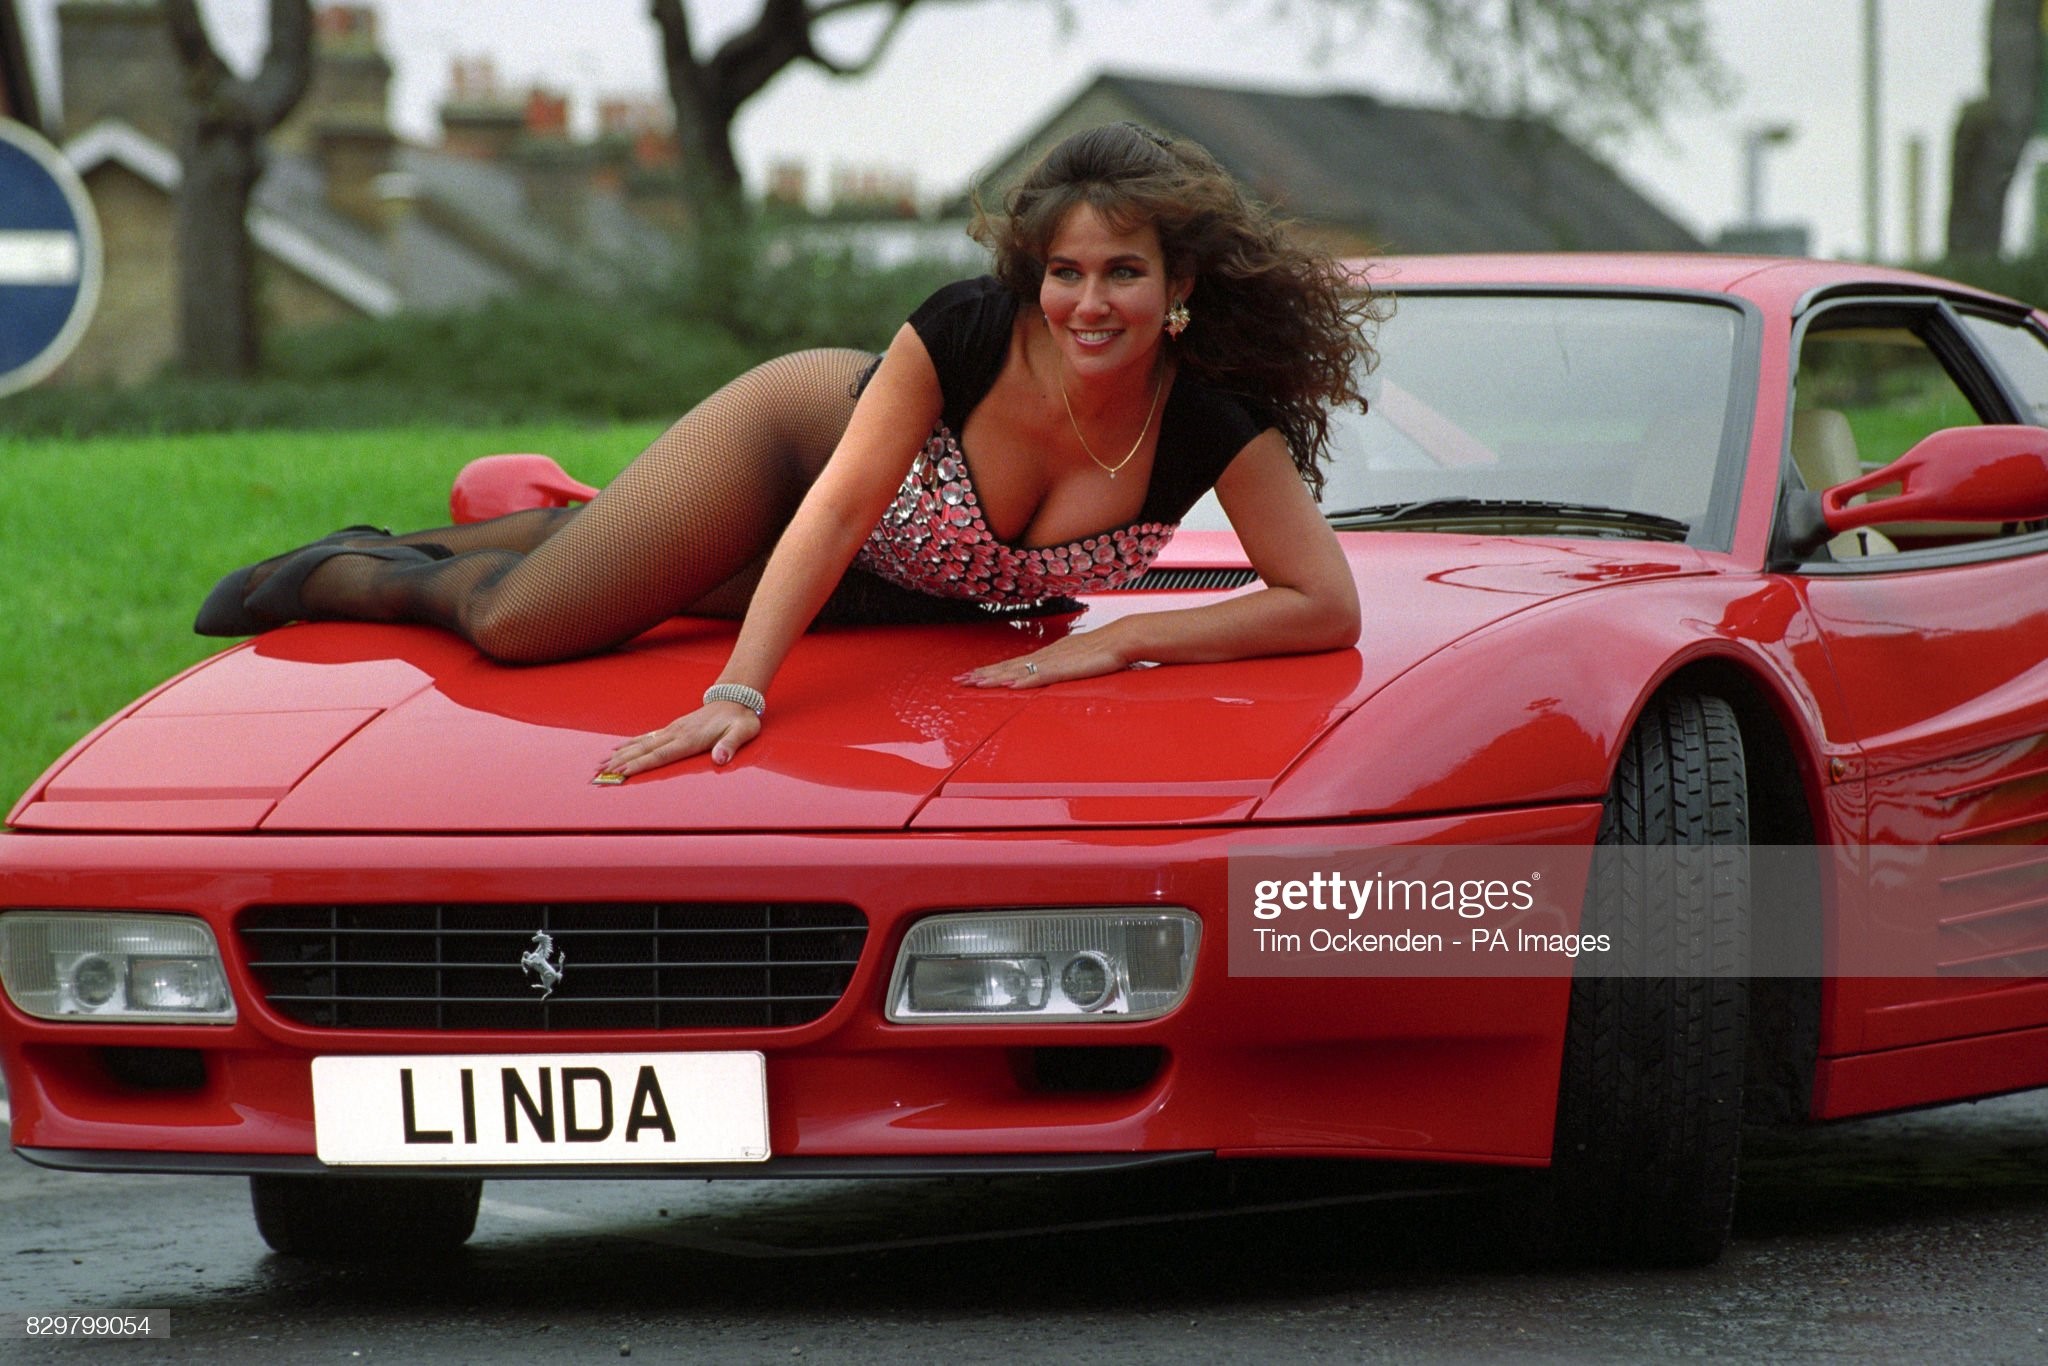 Lying on a Ferrari, Linda Lusardi poses with the number plate L1 NDA, which is to be auctioned at the DVLA classic collection sale, on October 01, 1993. 